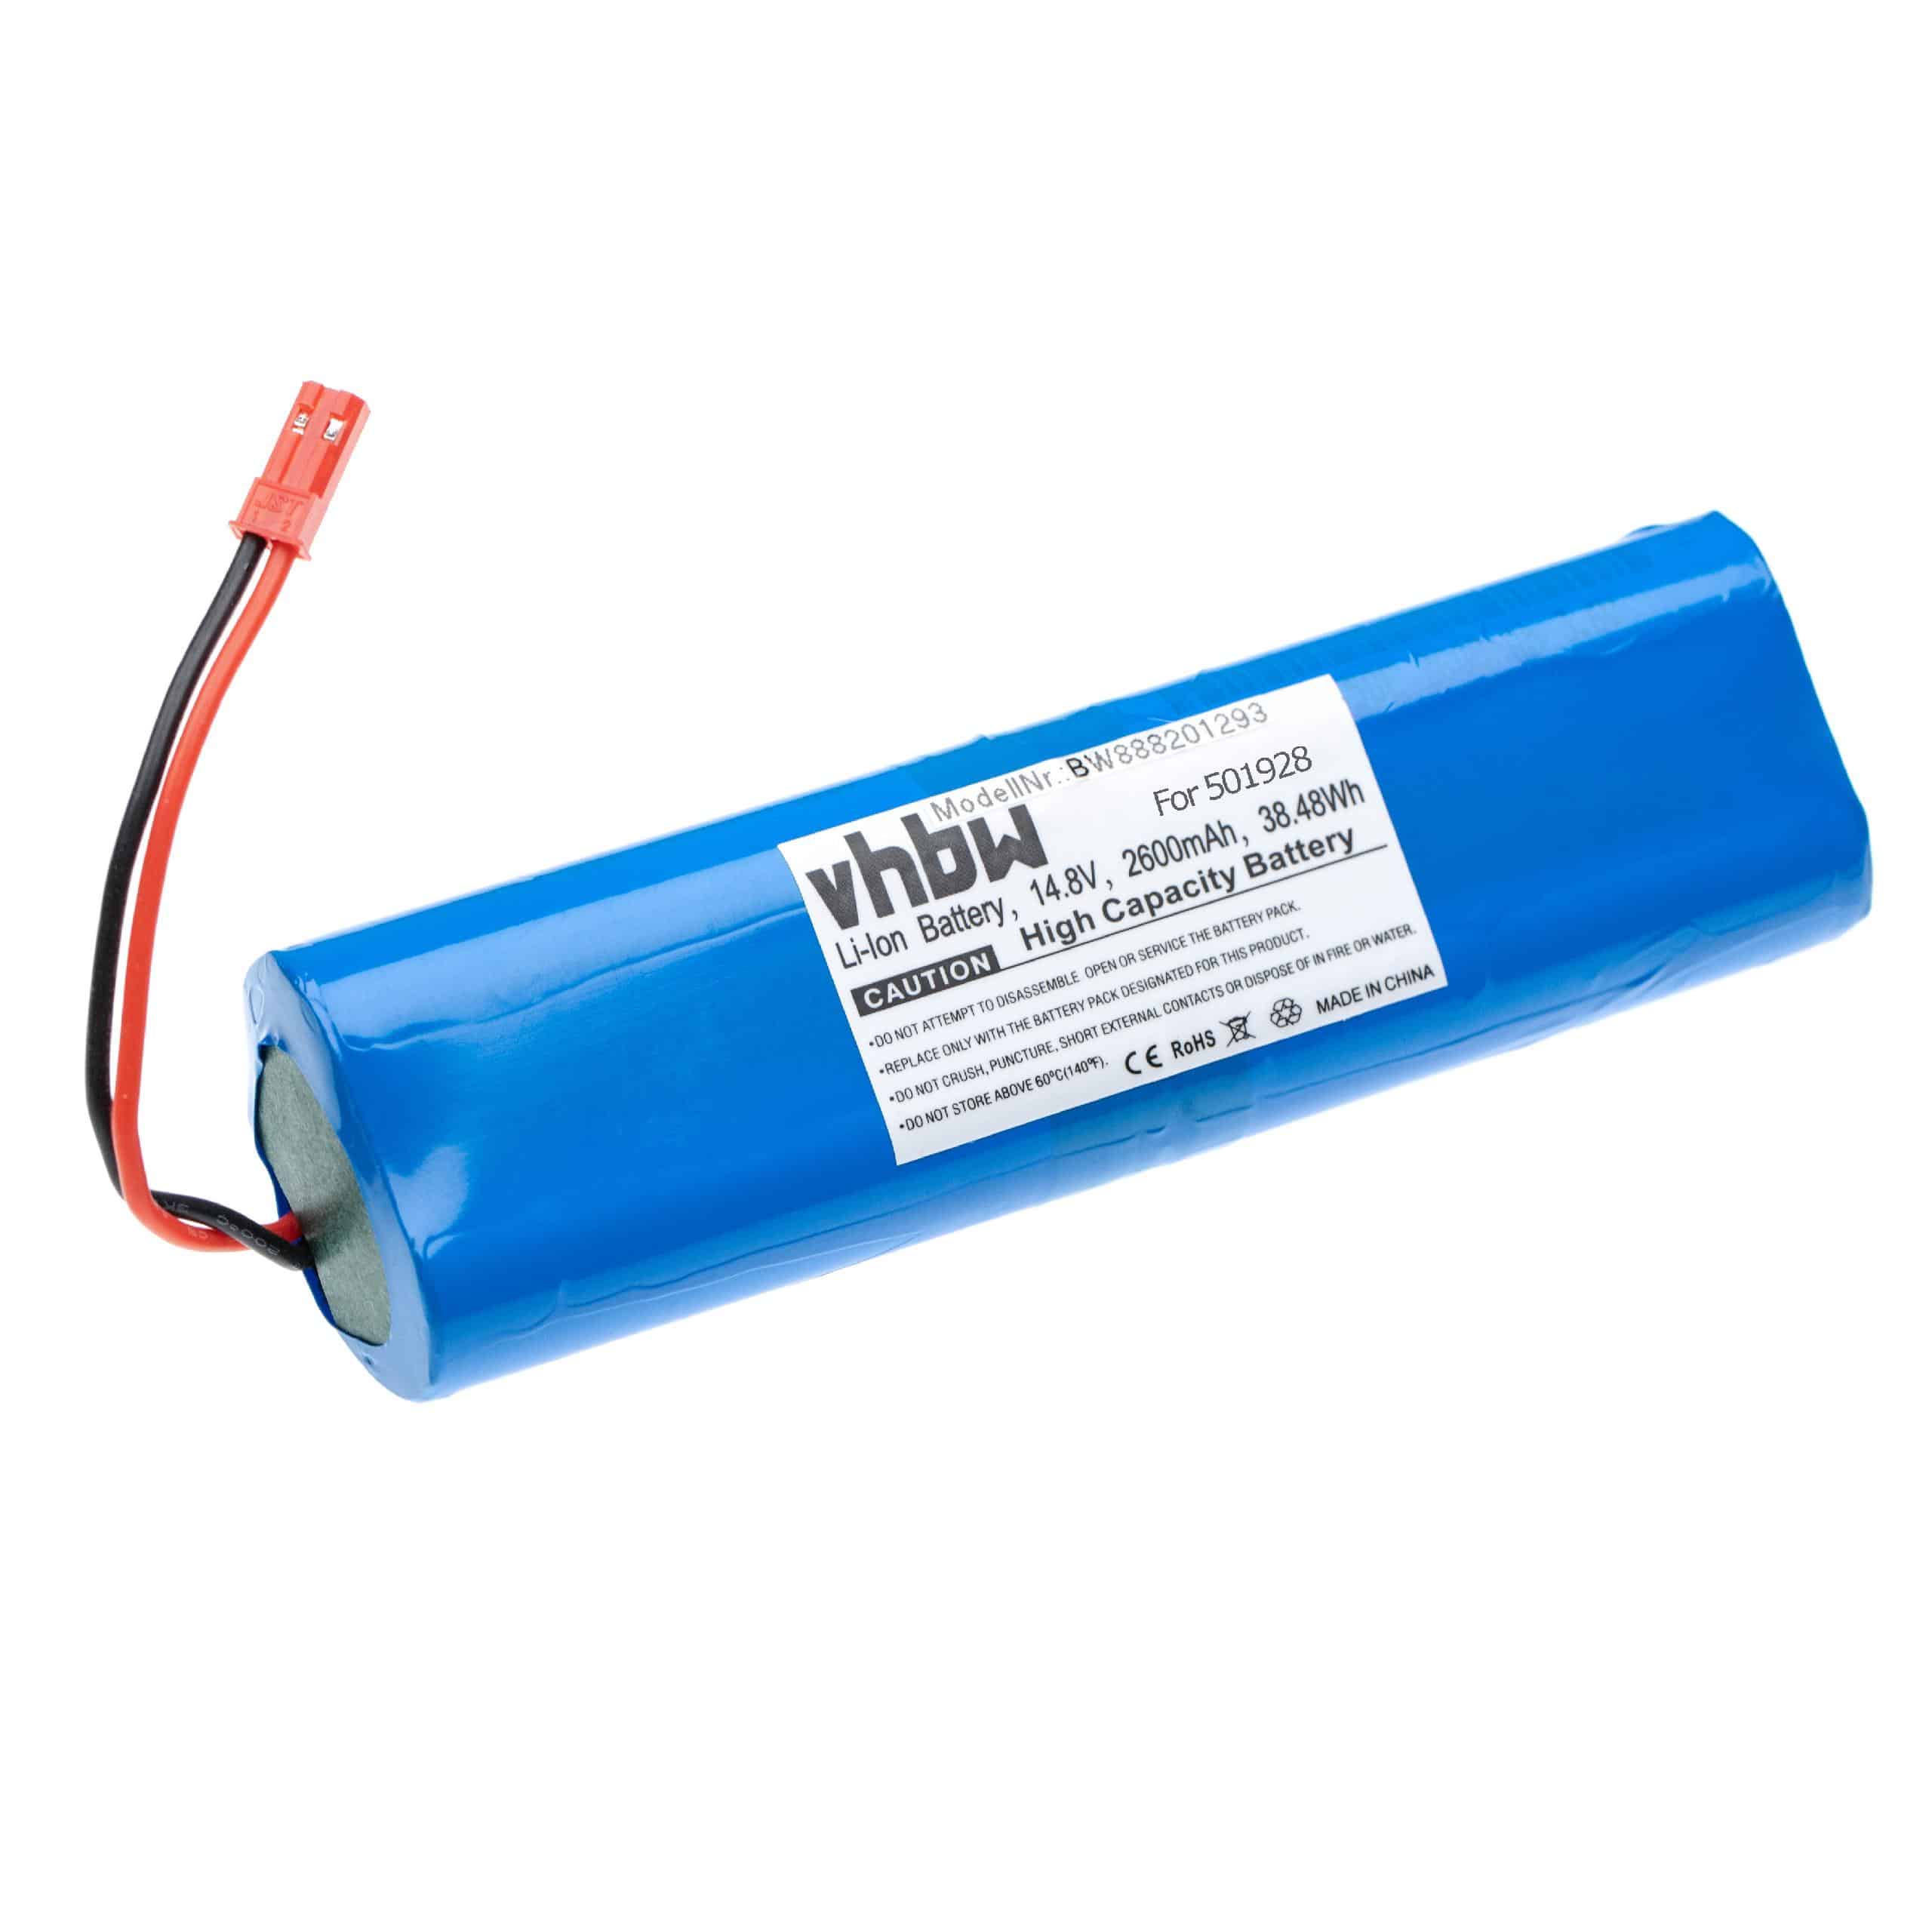 Battery Replacement for Zaco 501928 for - 2600mAh, 14.4V, Li-Ion